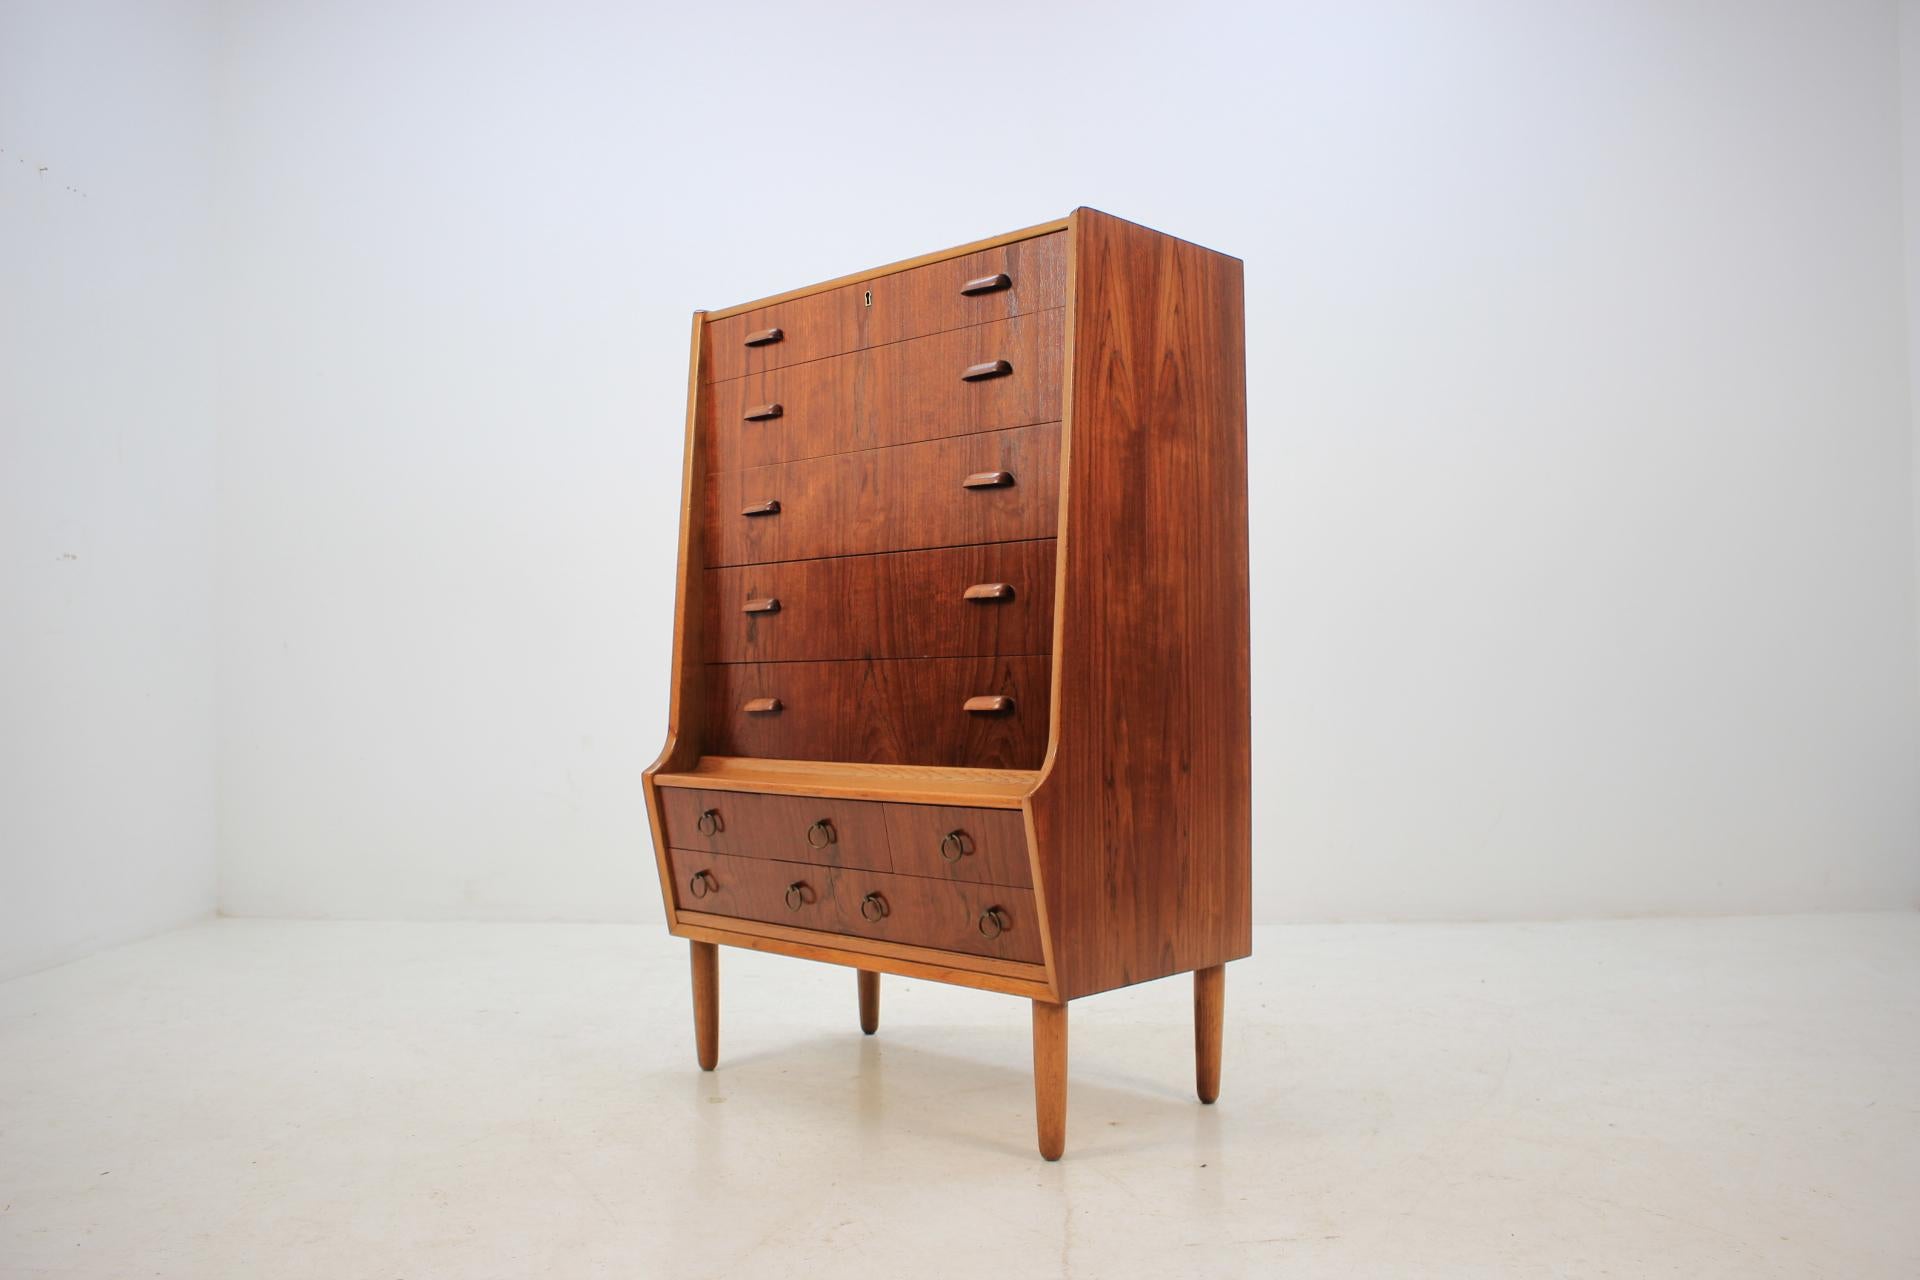 This commode features ten drawers. One of them with small compartments. The item was carefully refurbished.